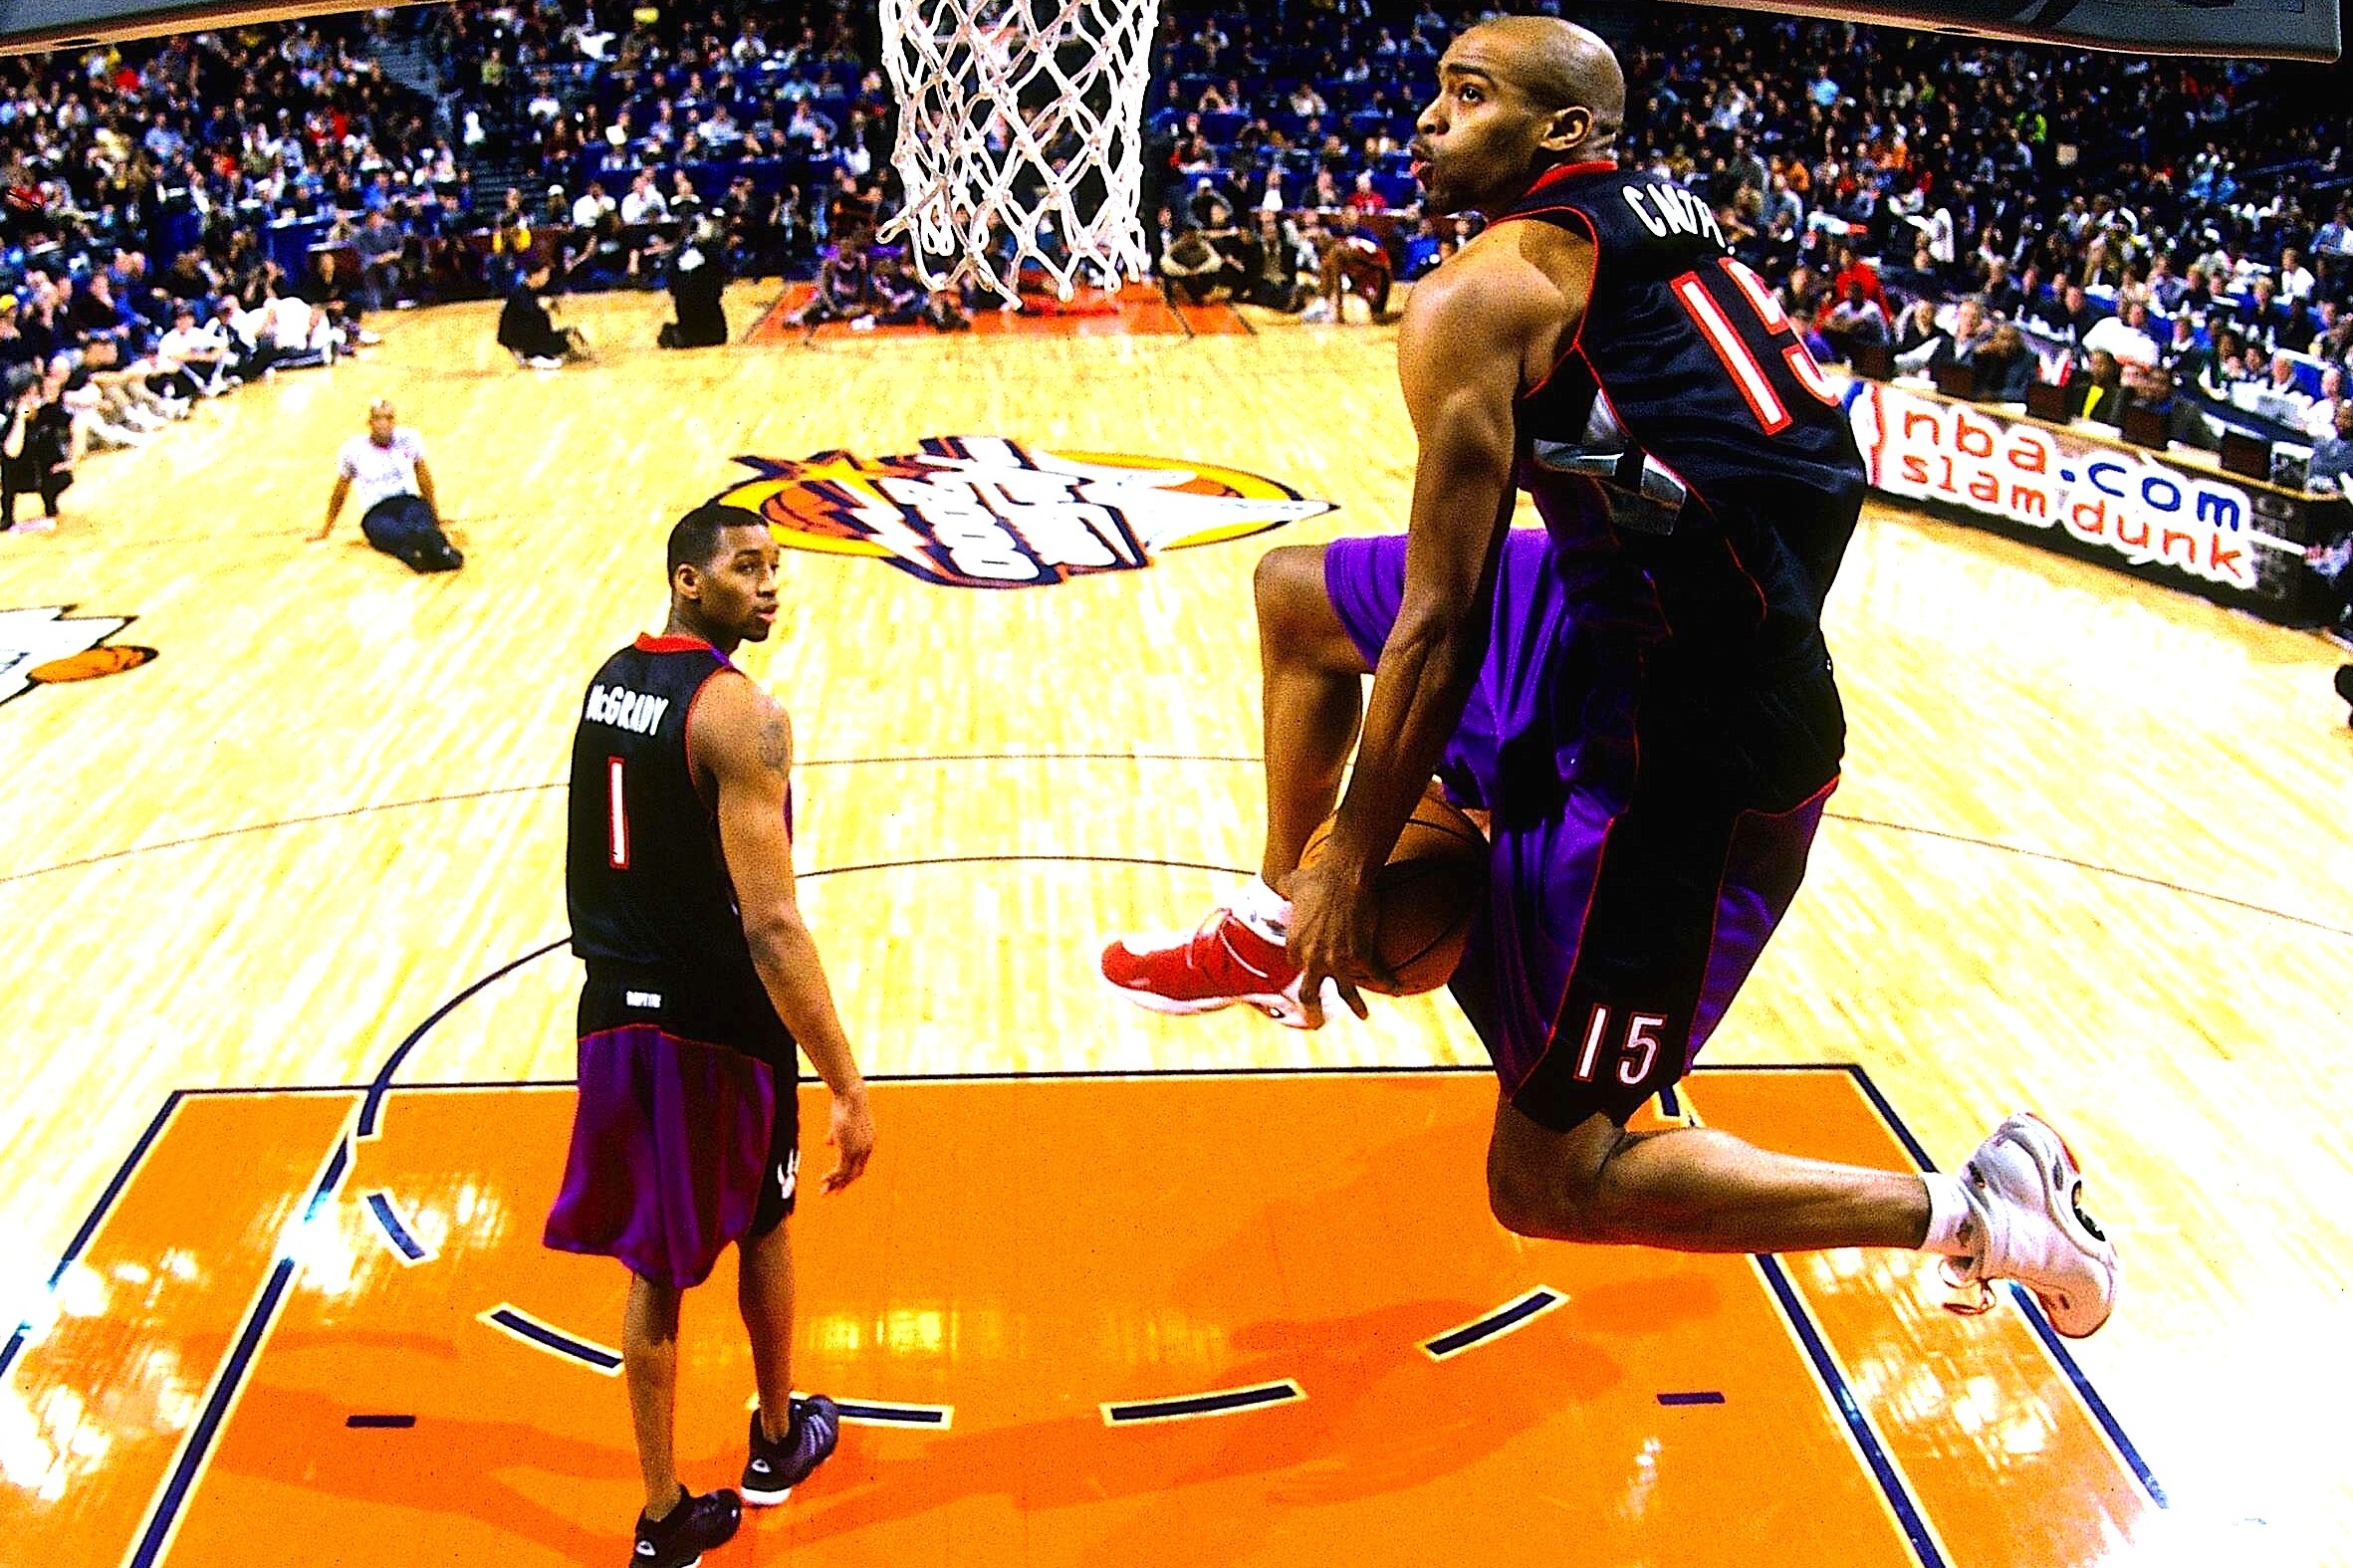 Ranking the 25 Greatest Dunks in NBA Slam Dunk Contest History